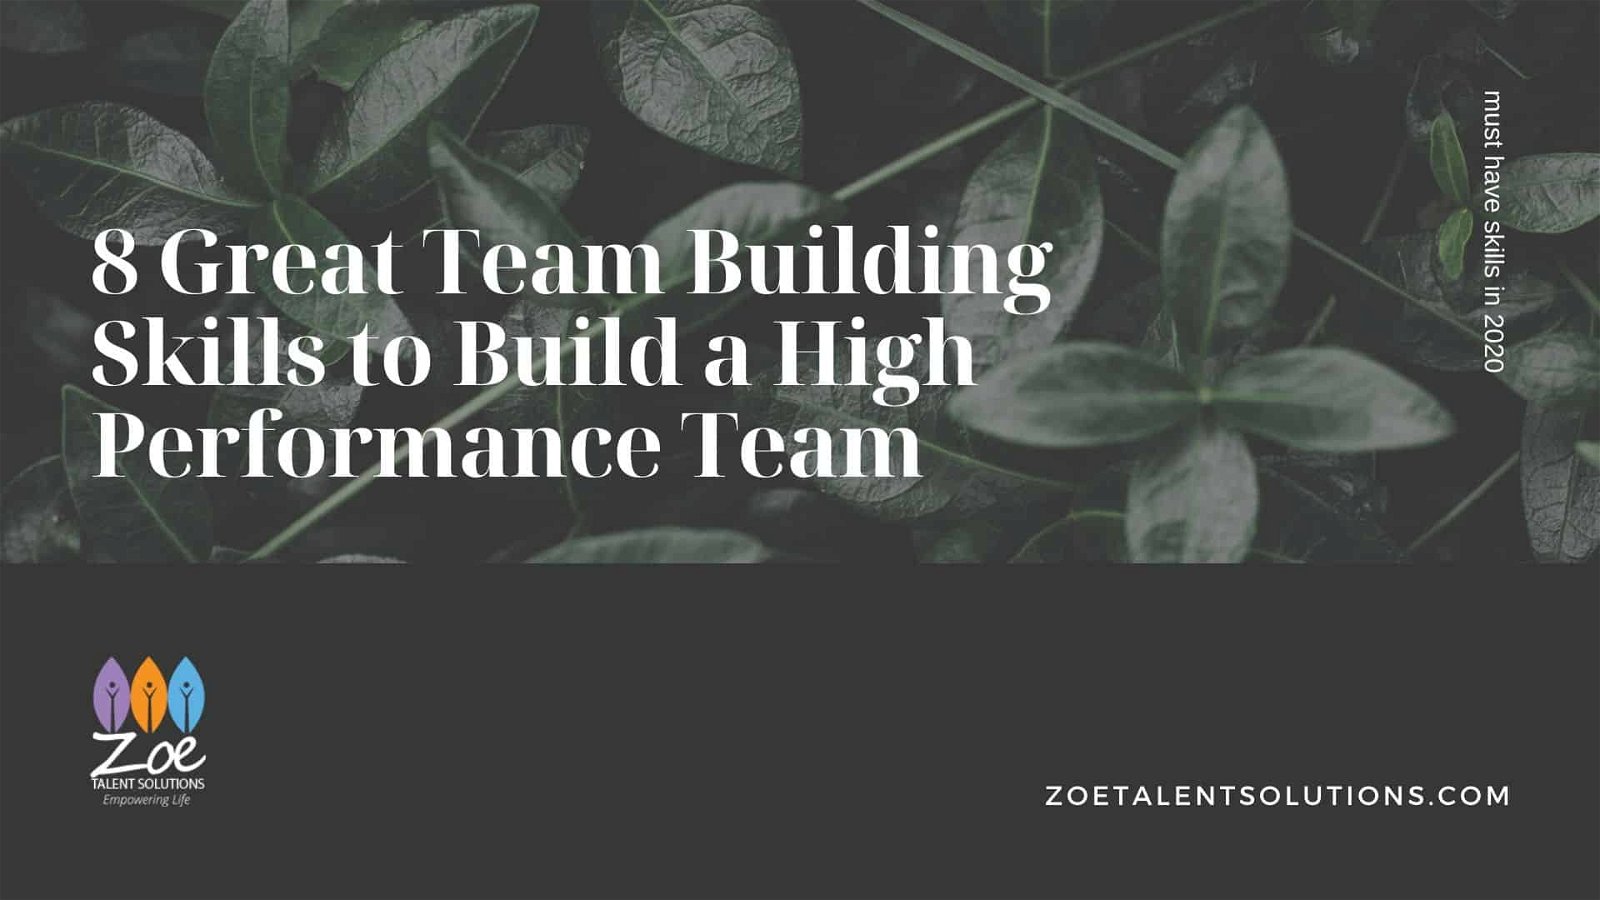 8 Great Team Building Skills to Build a High Performance Team